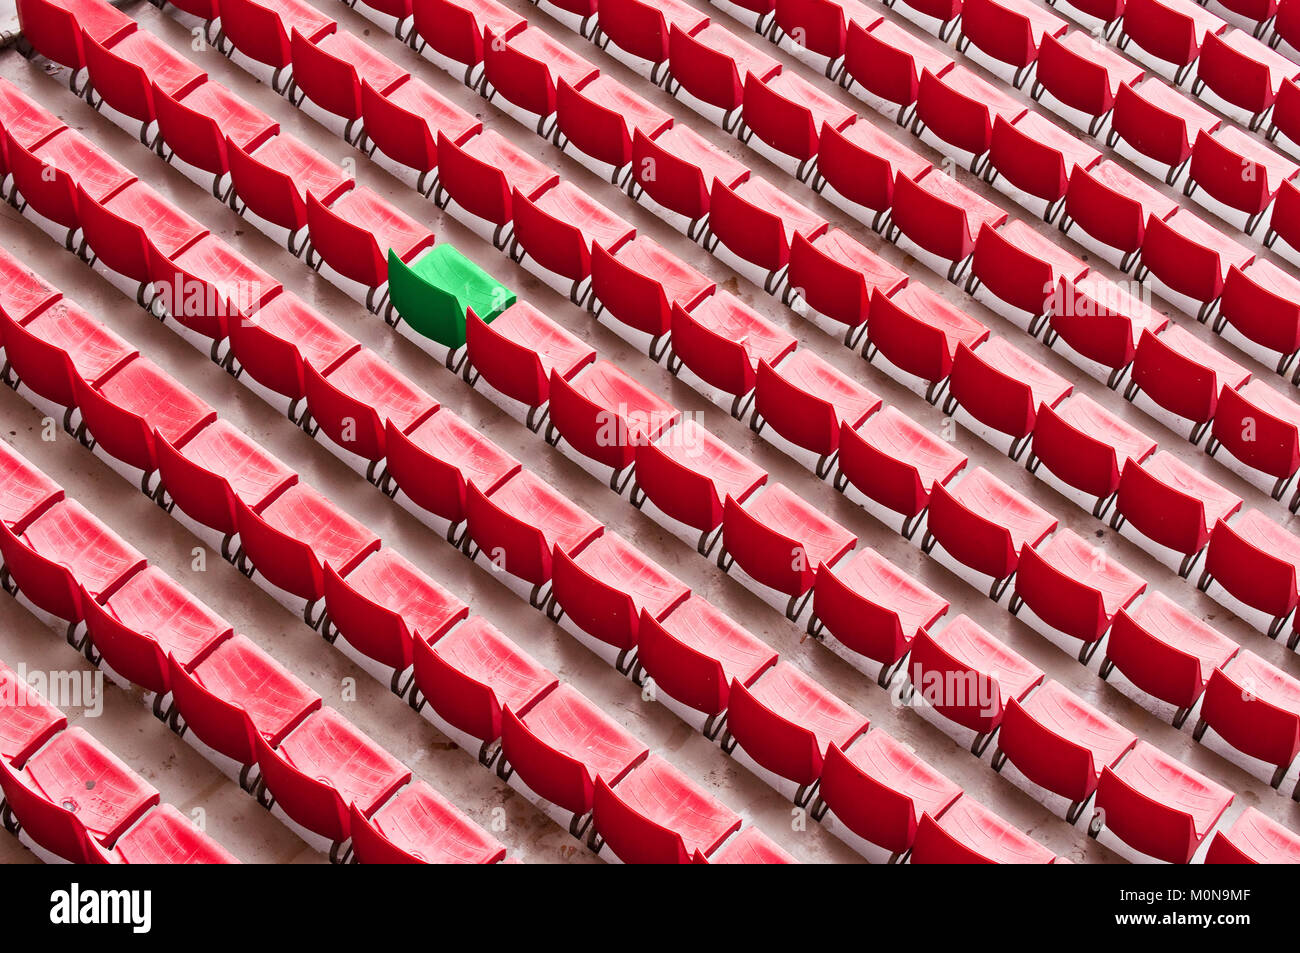 One green seat among red seats in a stadium, standing out of the crowd concept Stock Photo